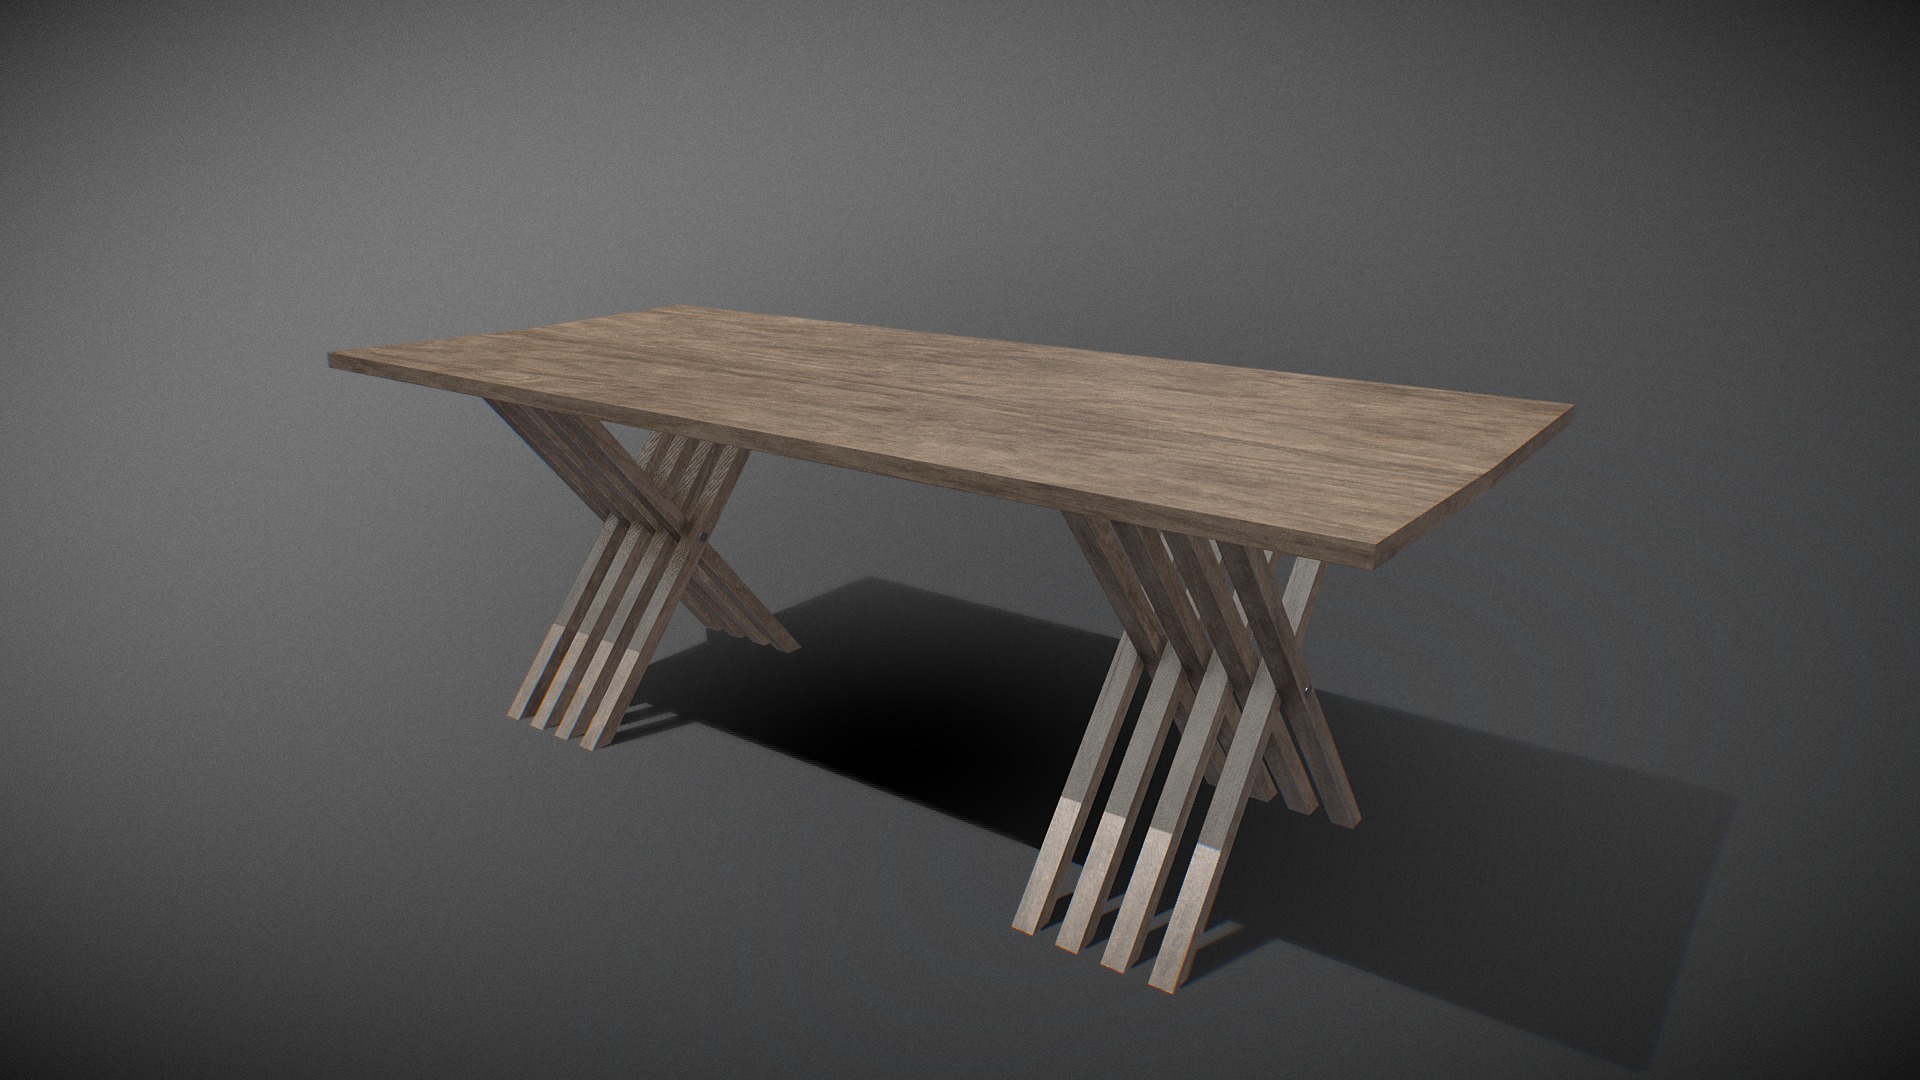 3D model Table wooden 02 - This is a 3D model of the Table wooden 02. The 3D model is about a wooden table with a white background.